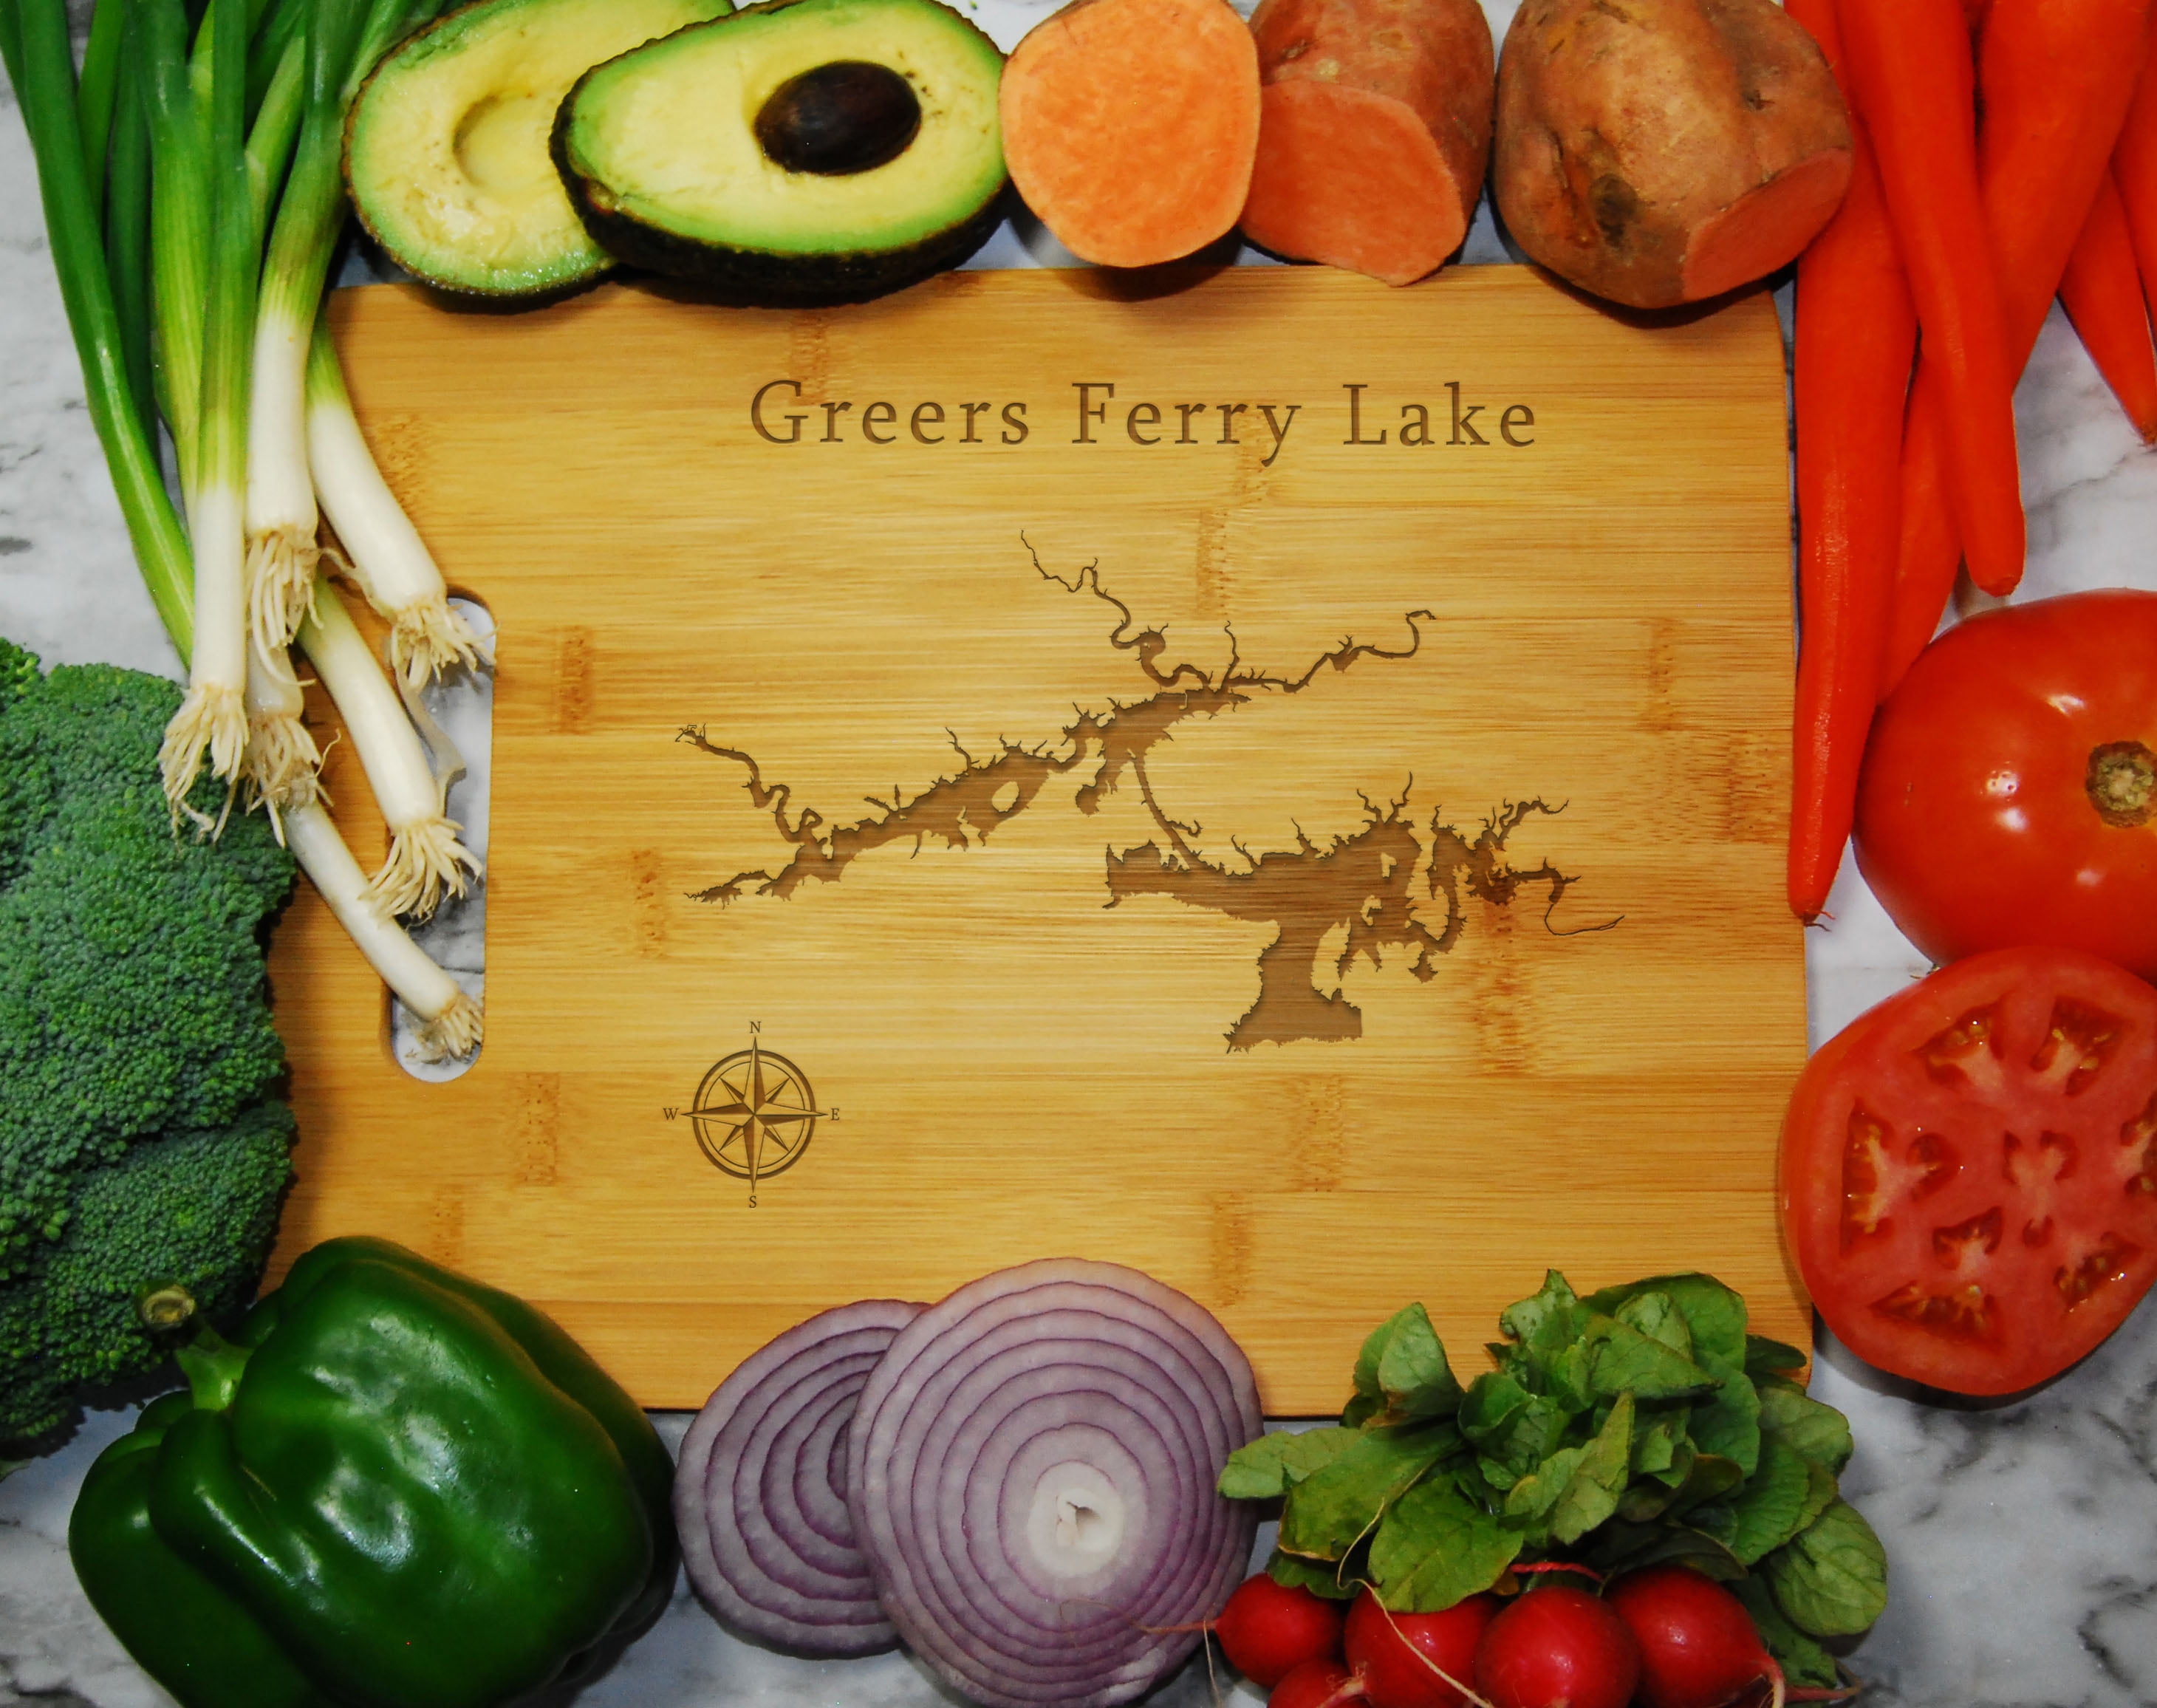 Greers Ferry Lake Map Engraved Bamboo Cutting Board 9.75x13.75 inches Arkansas 